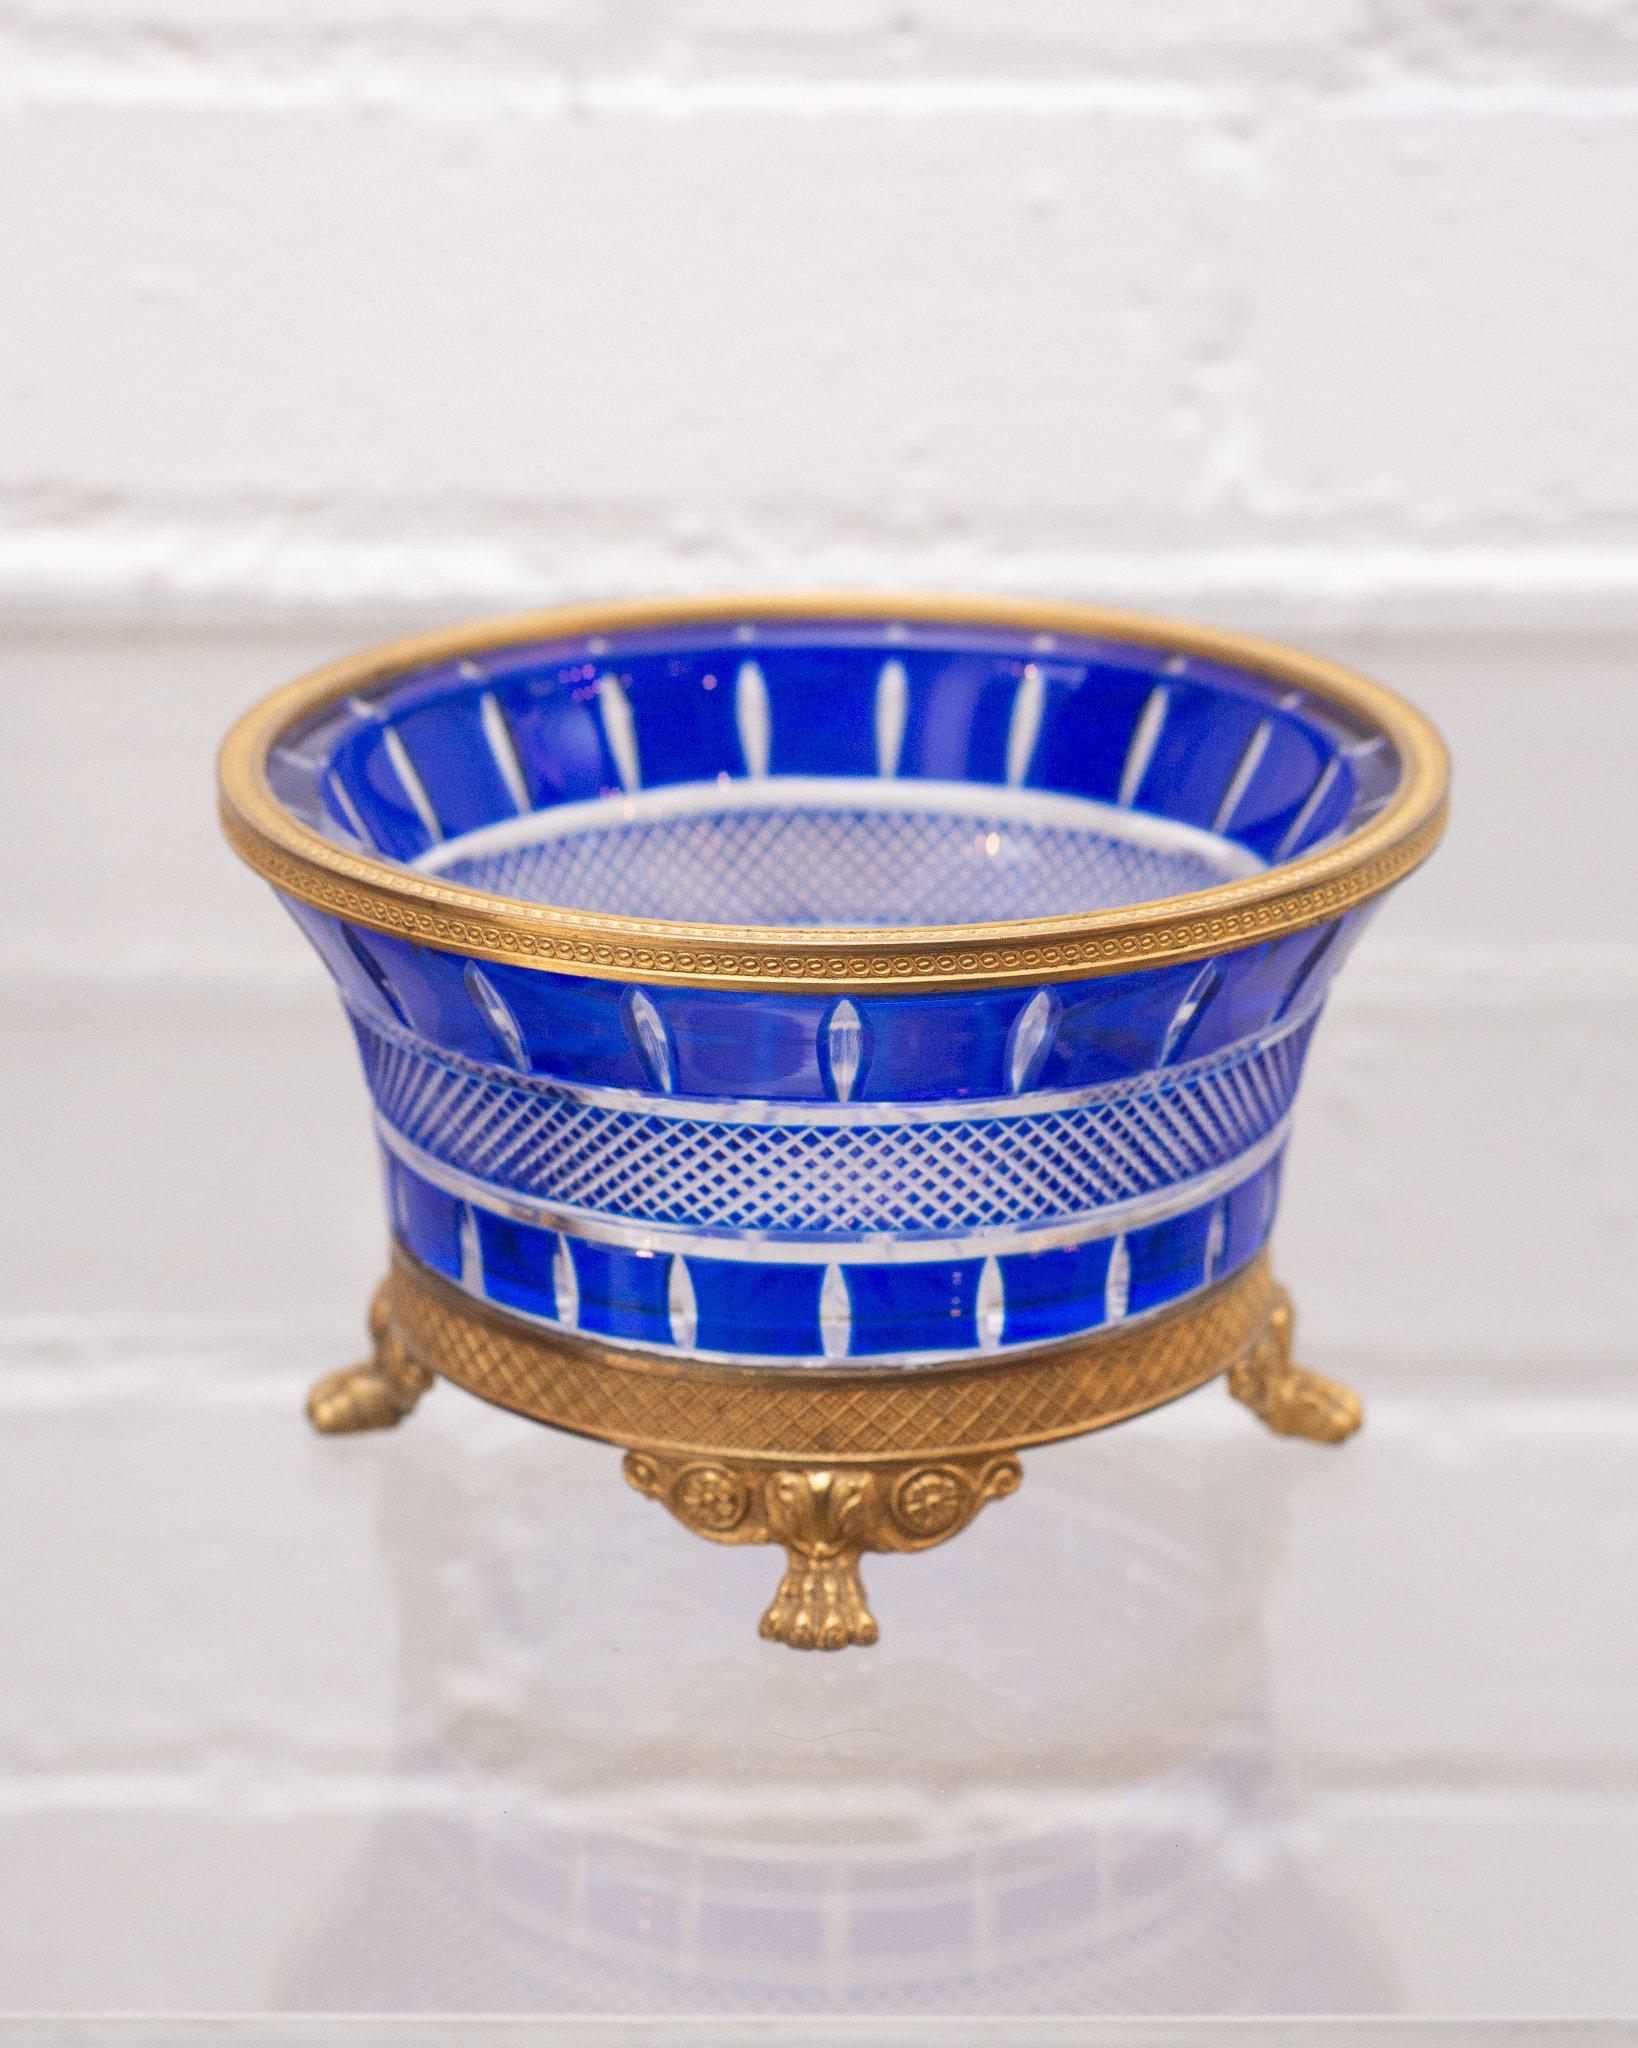 An ornate Russian Imperial cobalt blue and clear cut crystal bowl, circa 1890, with bronze mount. This elaborate handcut crystal catches the light beautifully.